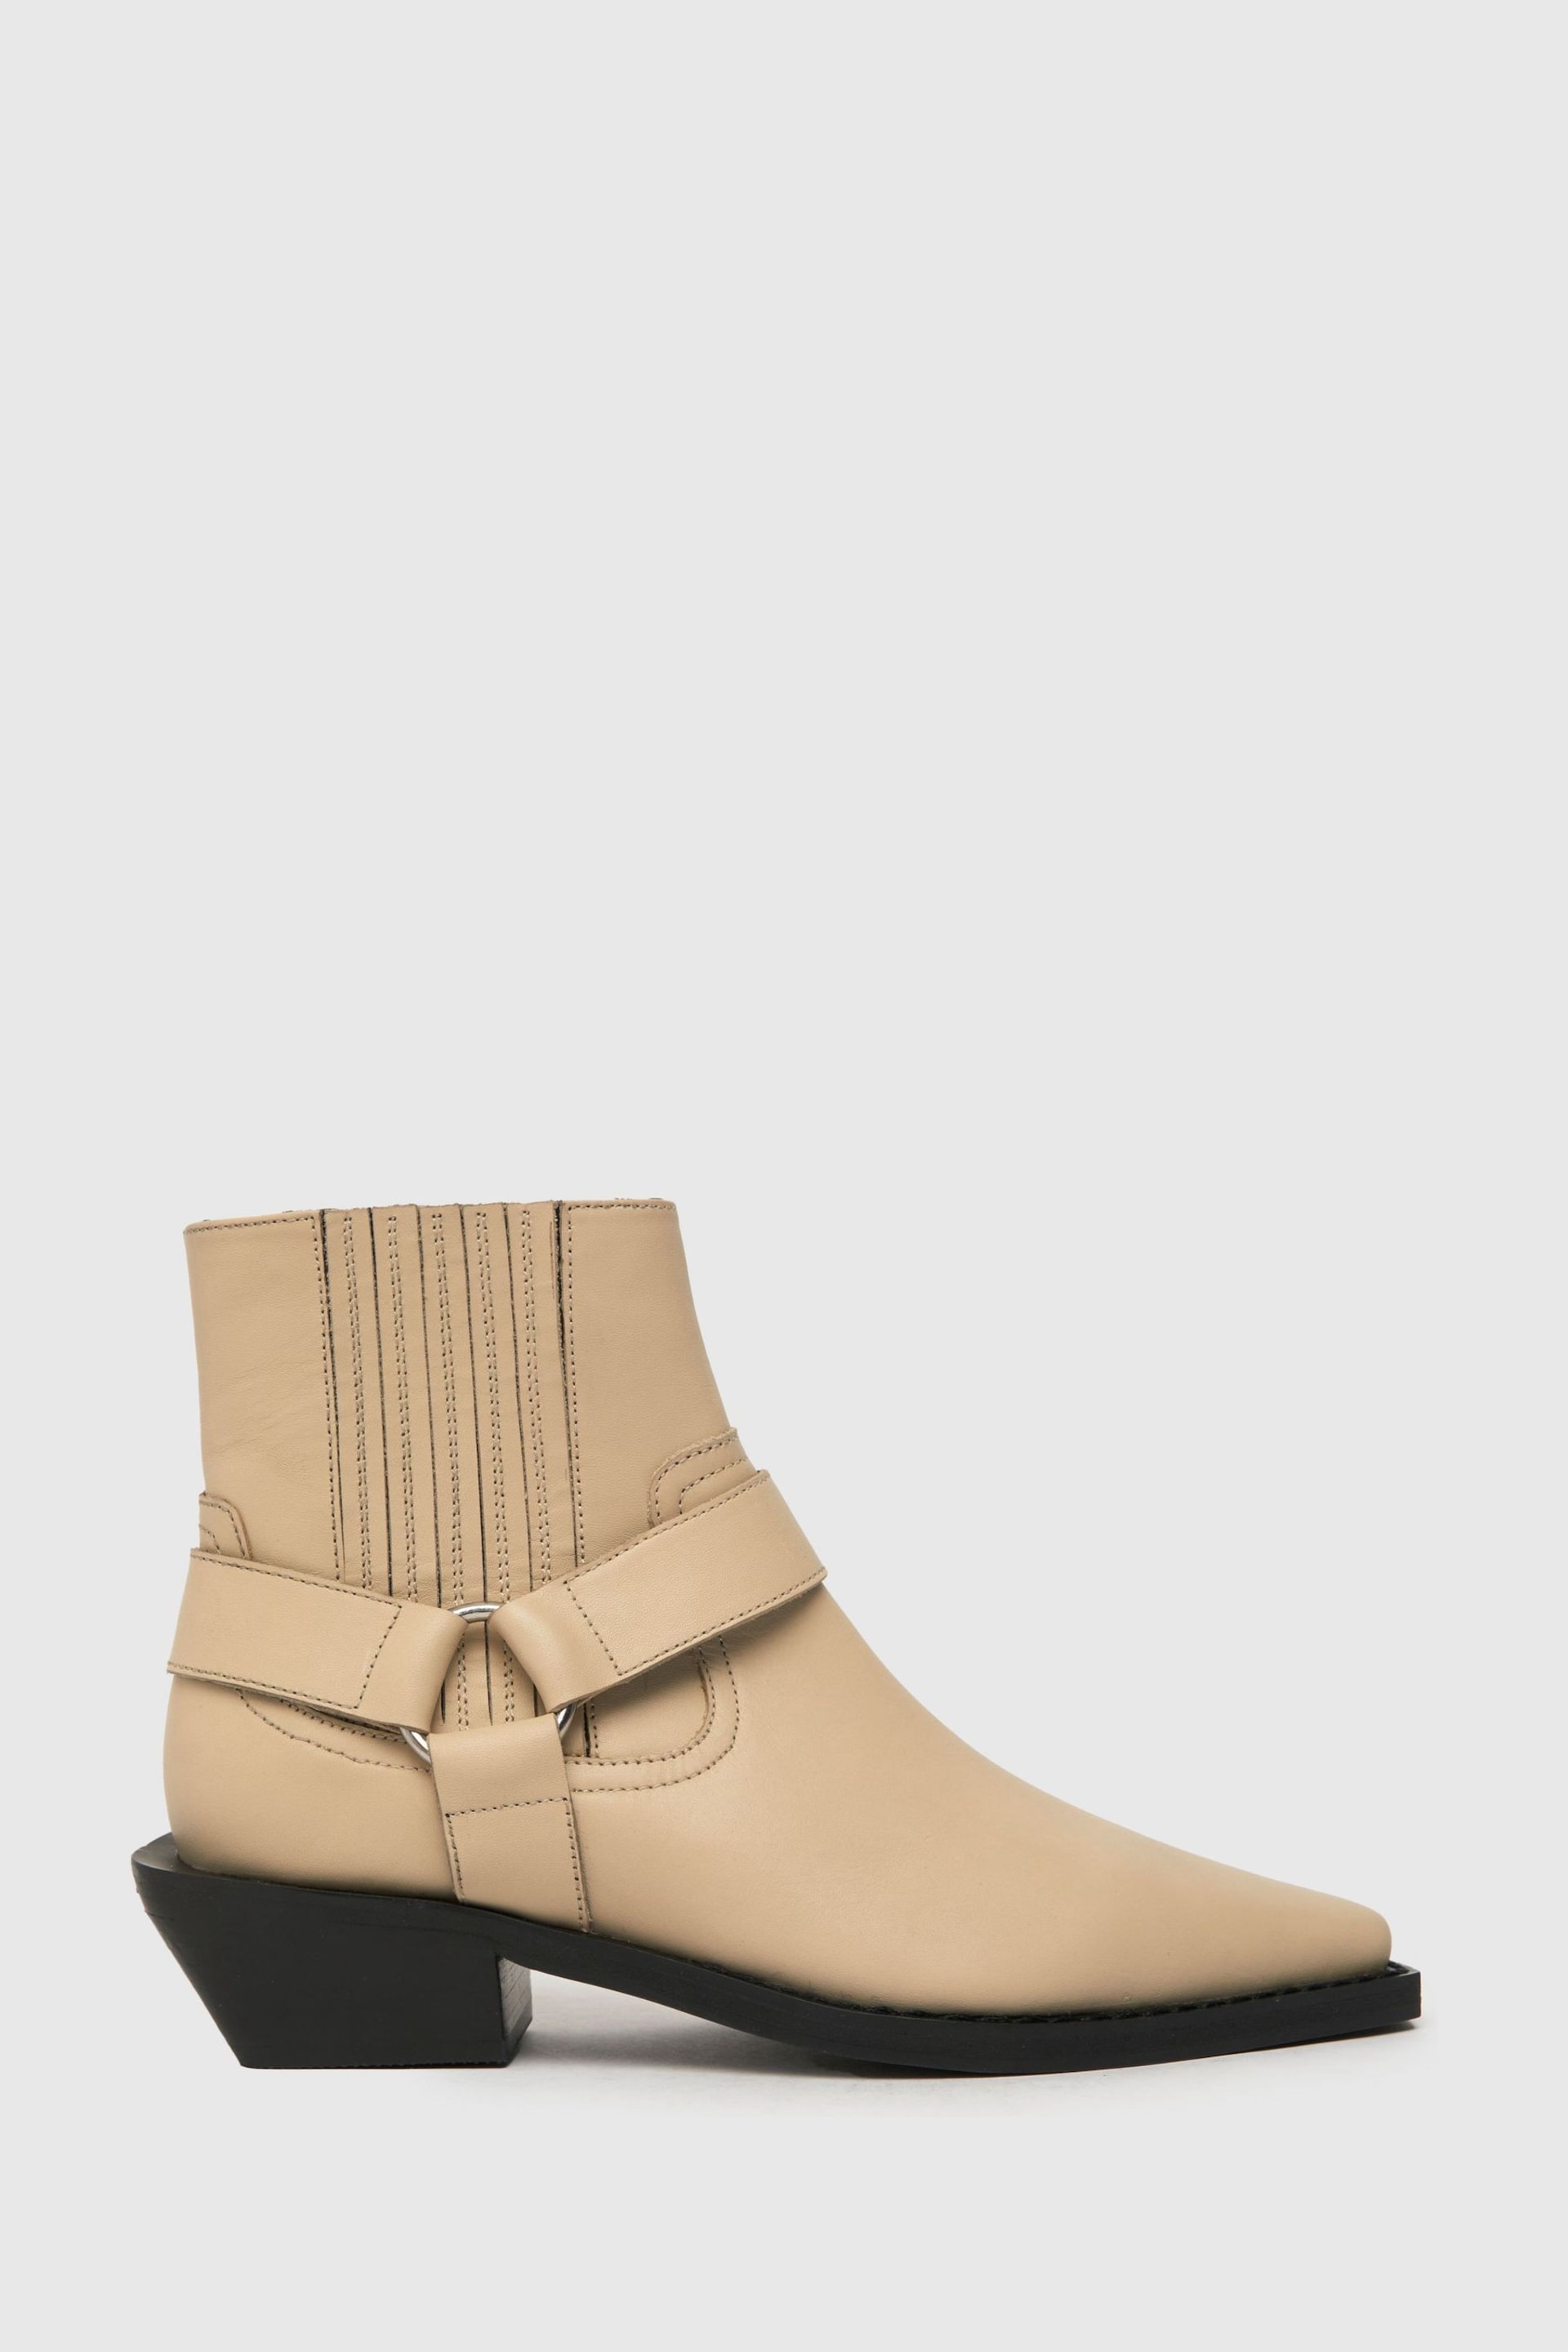 Schuh Azlan Leather Hardware Western Cream Boots - Image 1 of 4